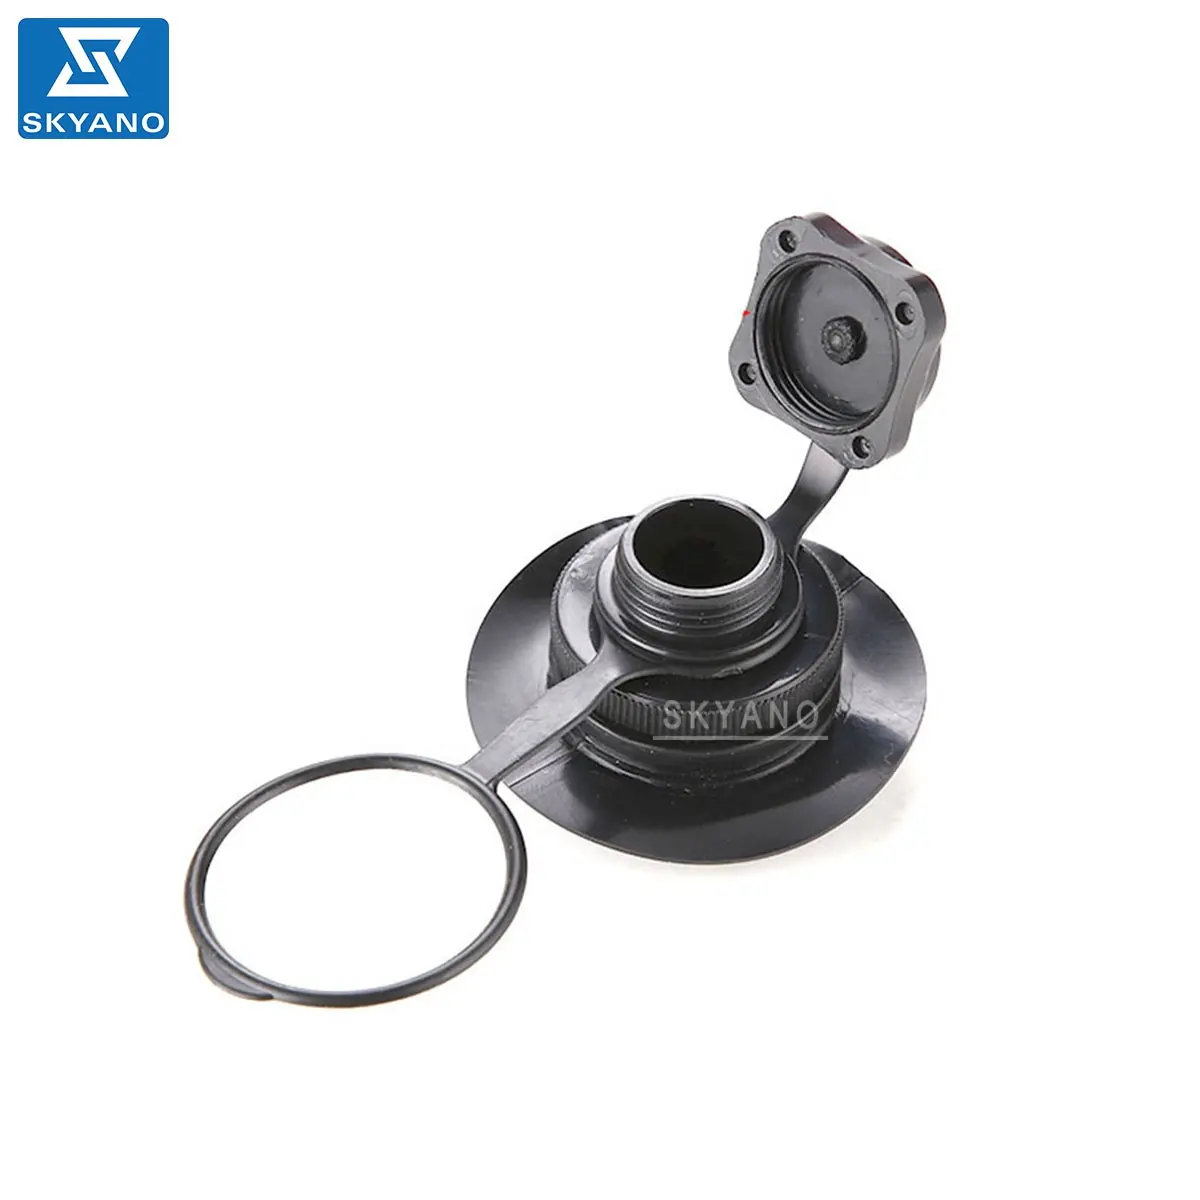 Boston Air Valve For Inflatable Products,spiral plug one-way inflation valve